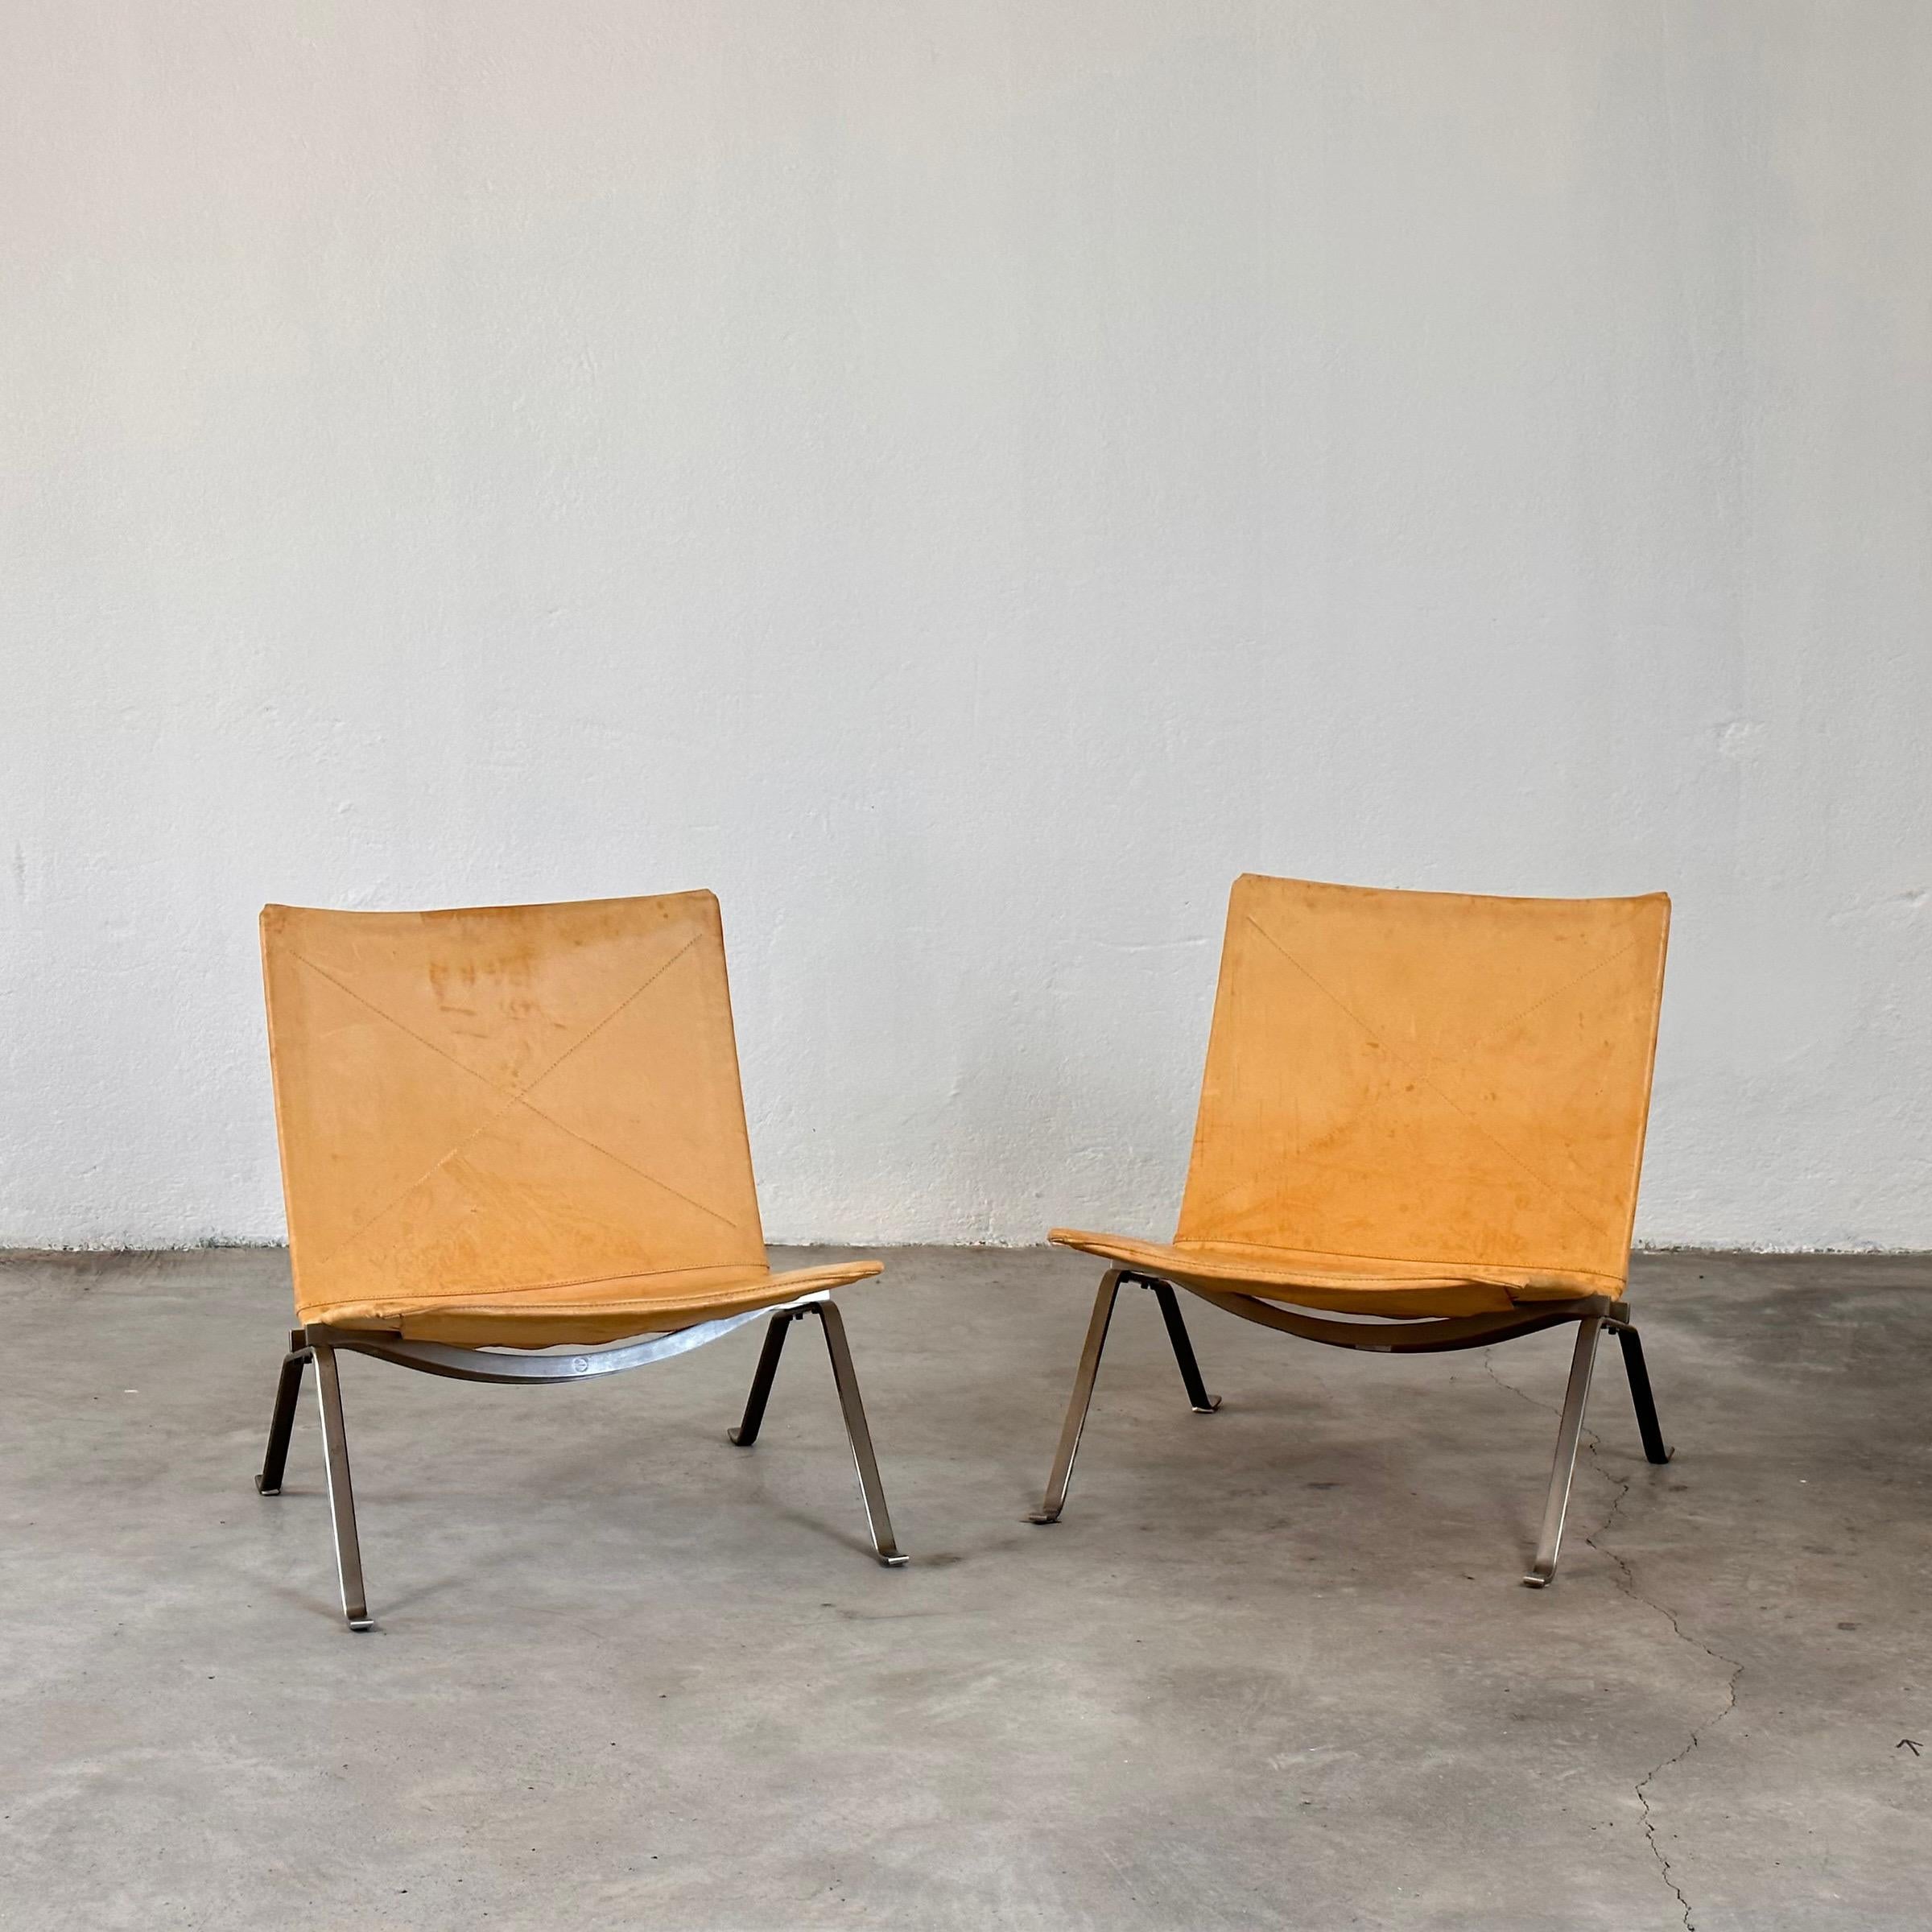 Iconic Poul Kjaerholm PK22 Lounge Chairs in Leather (2003 Pair)

Discover timeless elegance with this exquisite pair of Poul Kjaerholm PK22 Lounge Chairs, a testament to mid-century modern design. Created in 1956 and produced in 2003 by Fritz